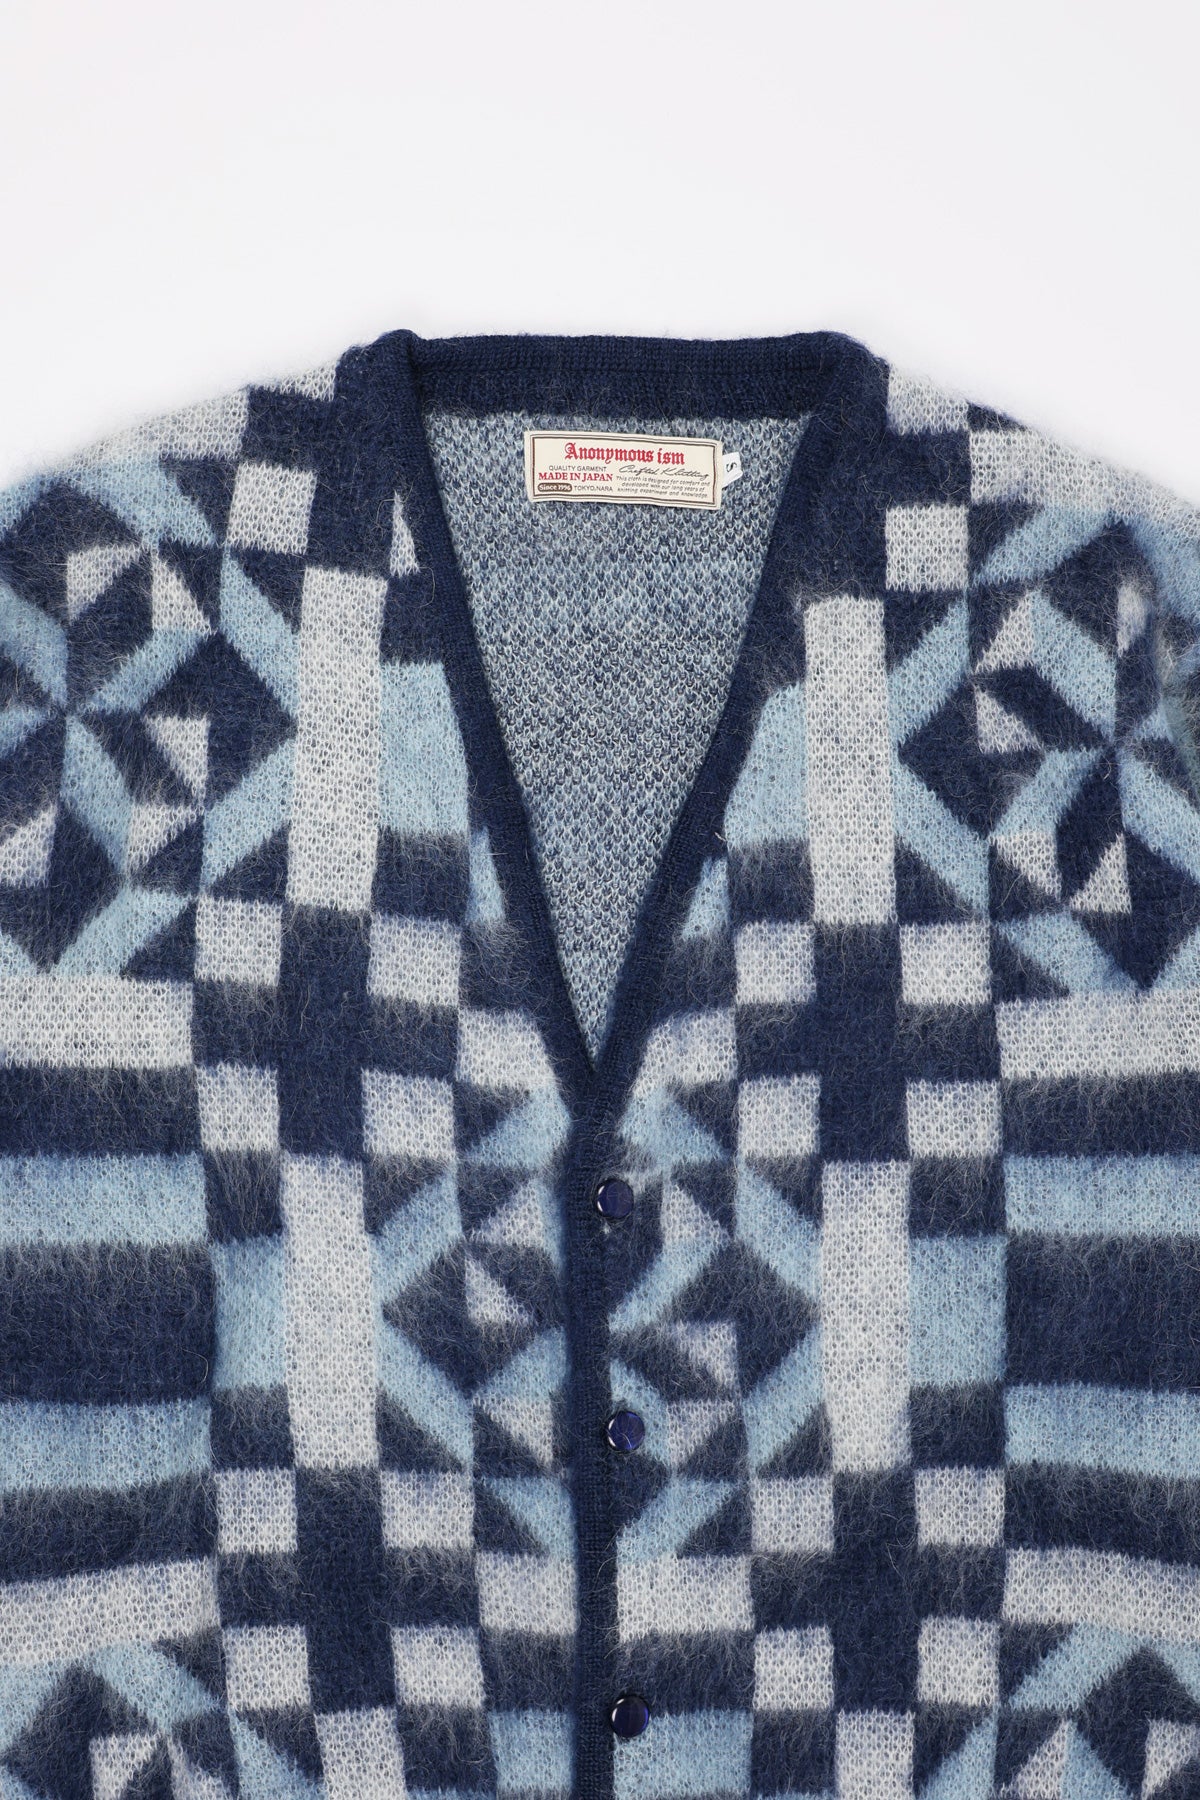 Anonymous Ism Vintage Quilt Mohair Cardigan | Blue | Canoe Club